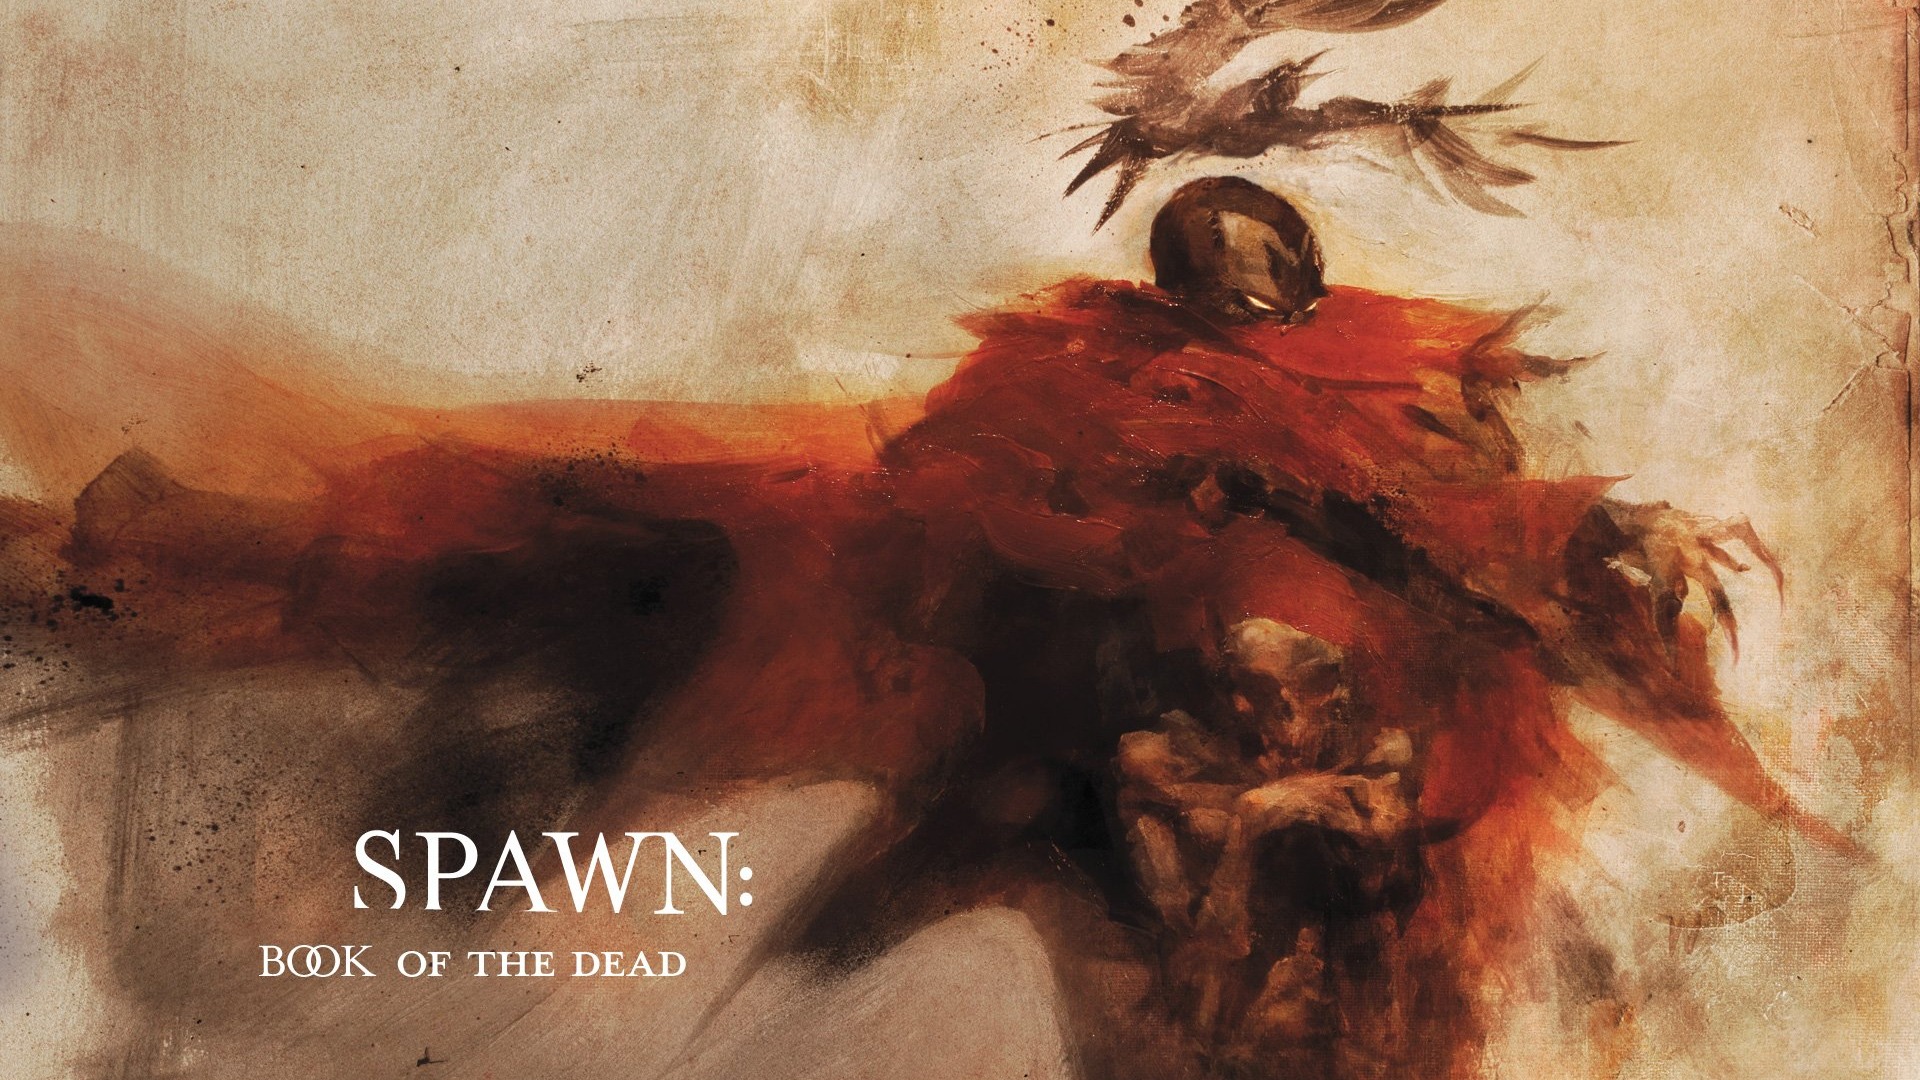 Spawn HD Wallpapers #2 - 1920x1080